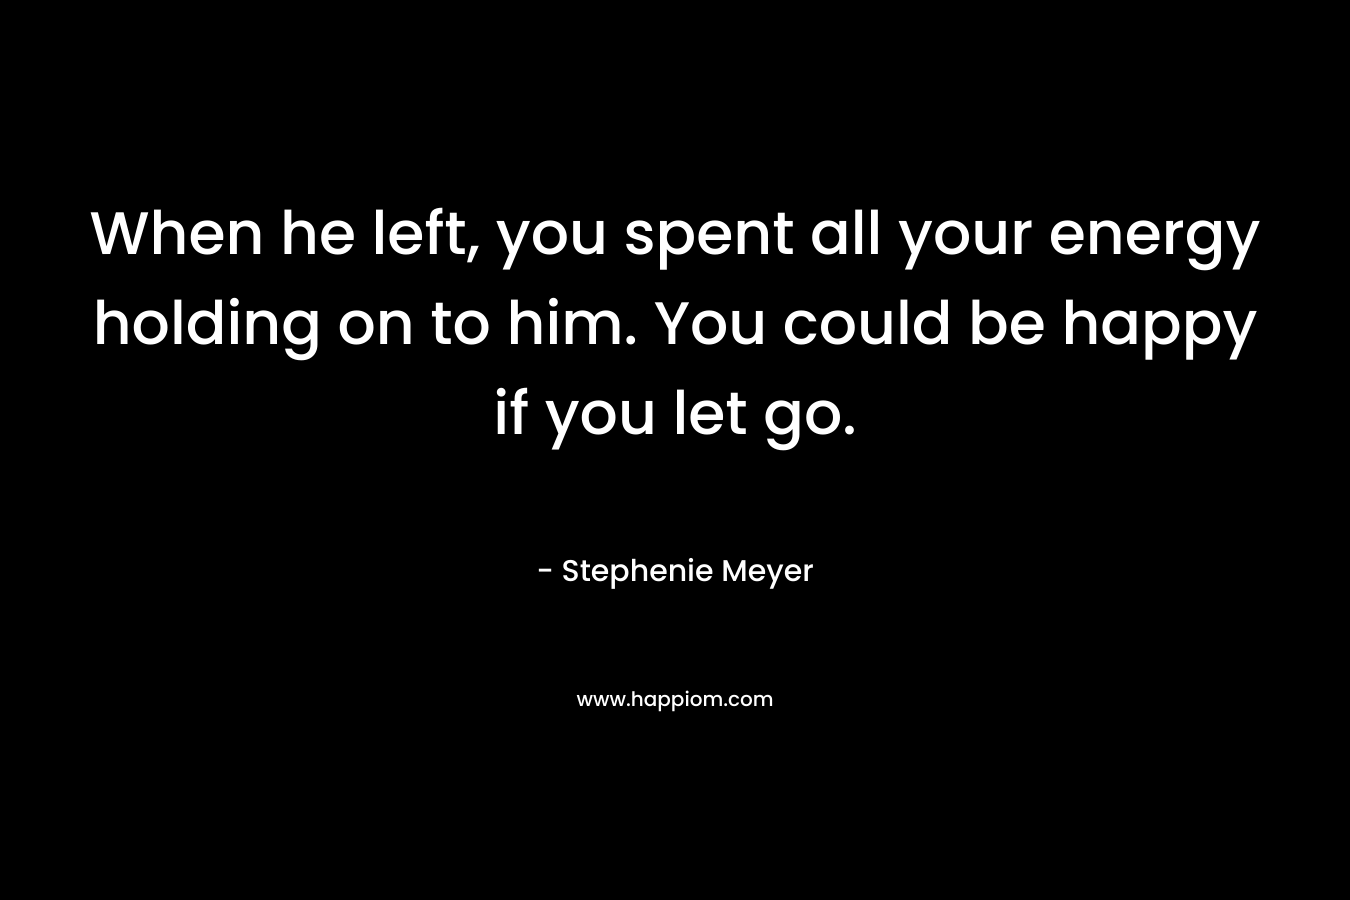 When he left, you spent all your energy holding on to him. You could be happy if you let go. – Stephenie Meyer